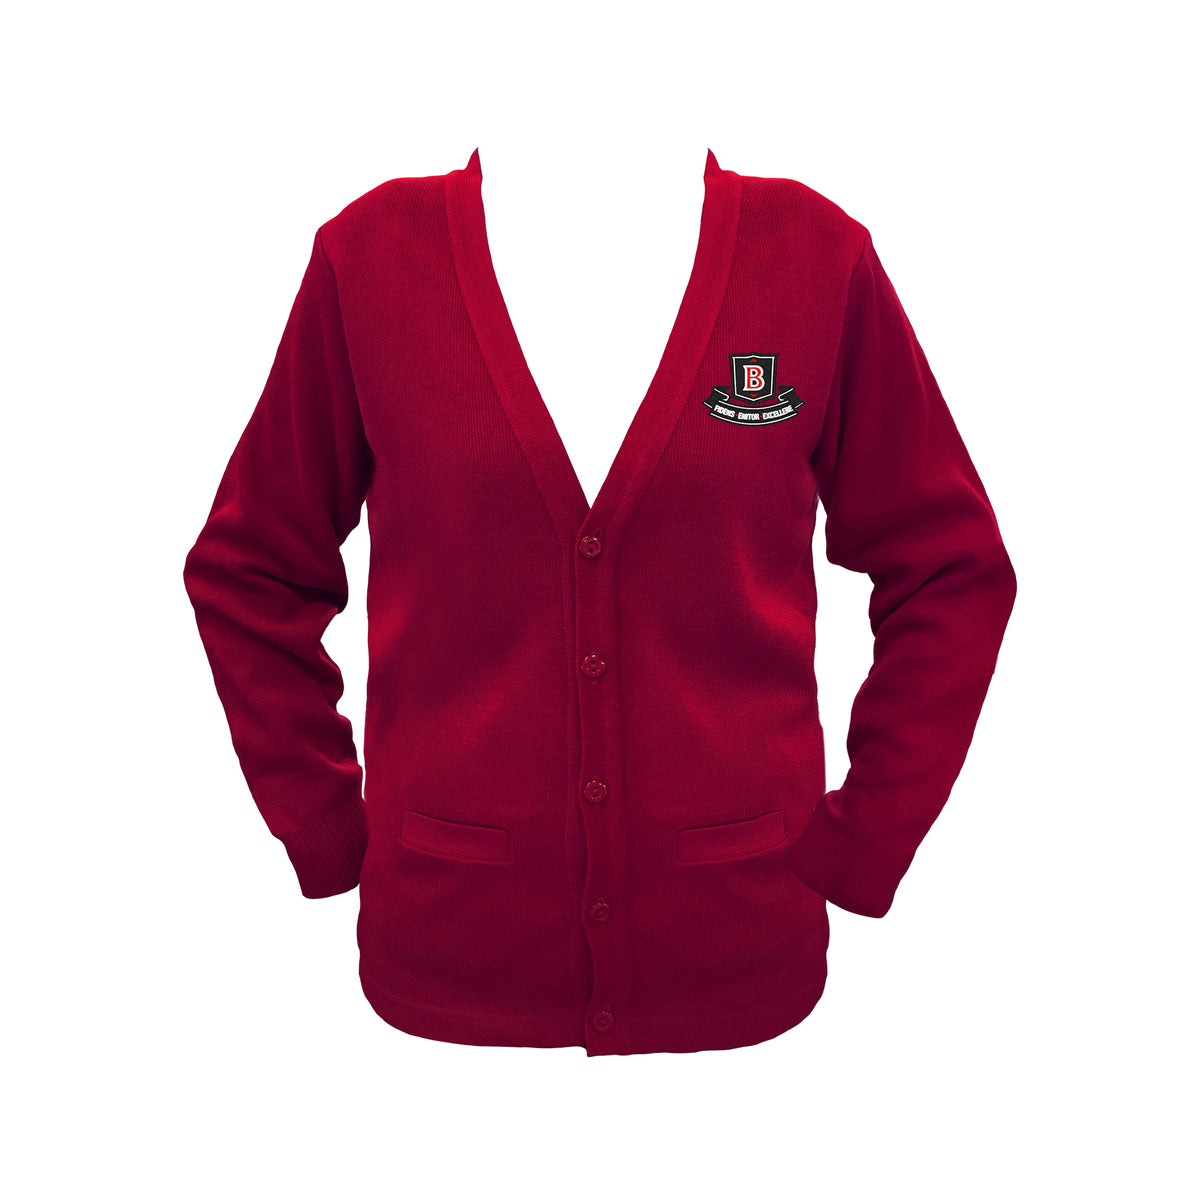 BROCKTON RED CARDIGAN, UP TO SIZE 32